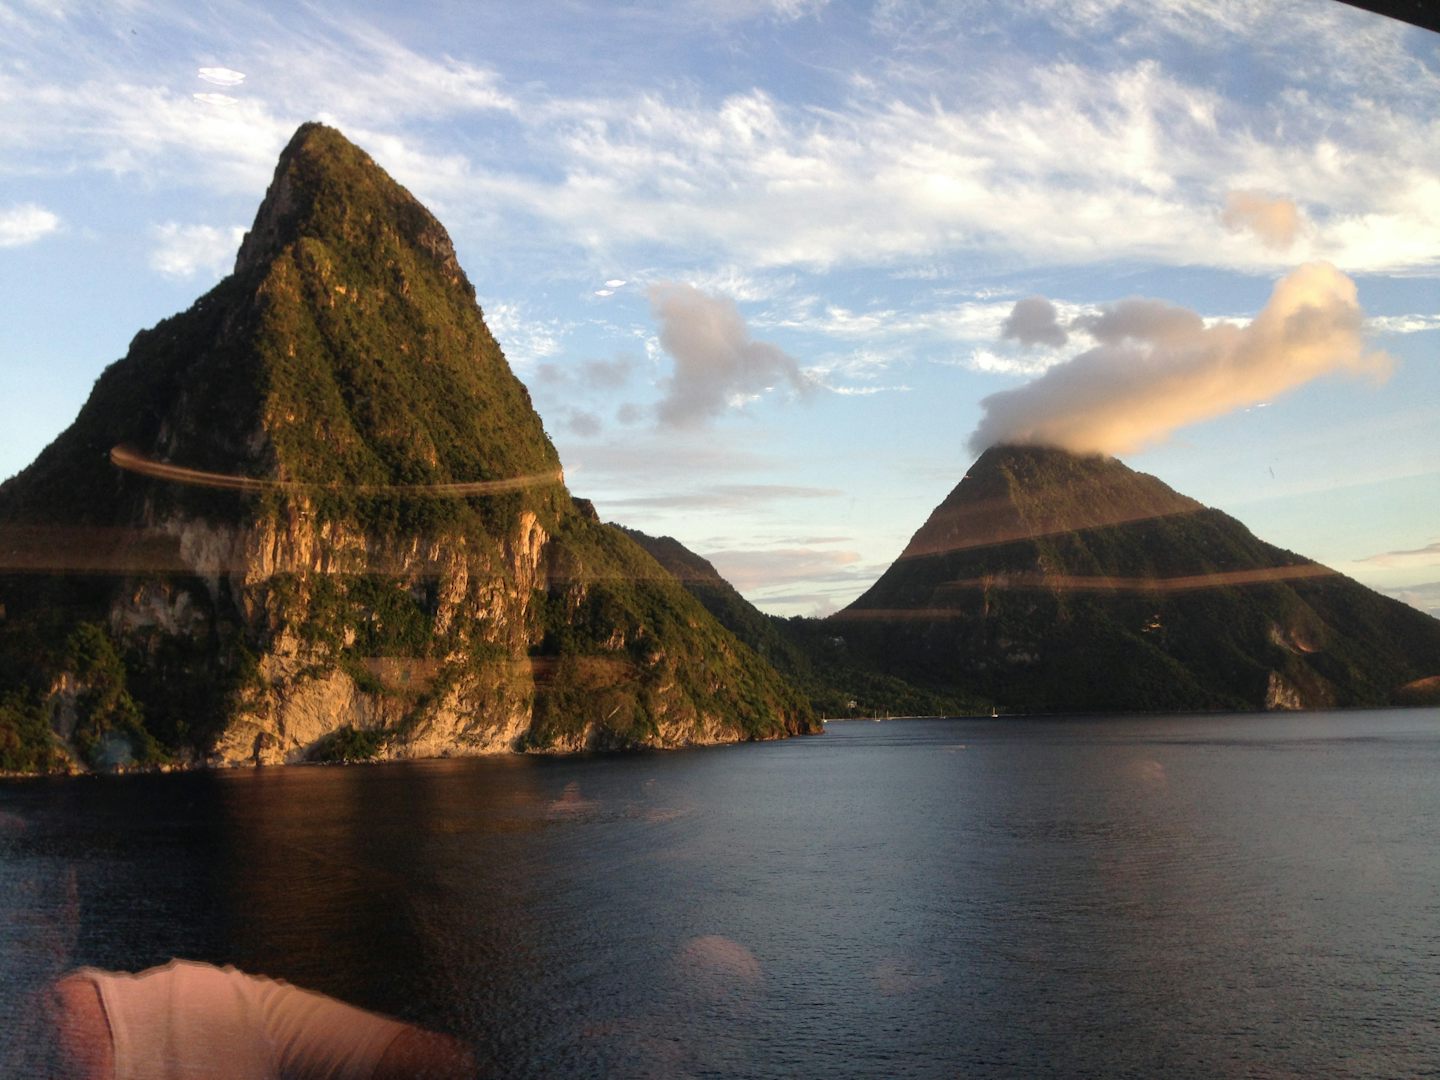 Sailing past the Pitons